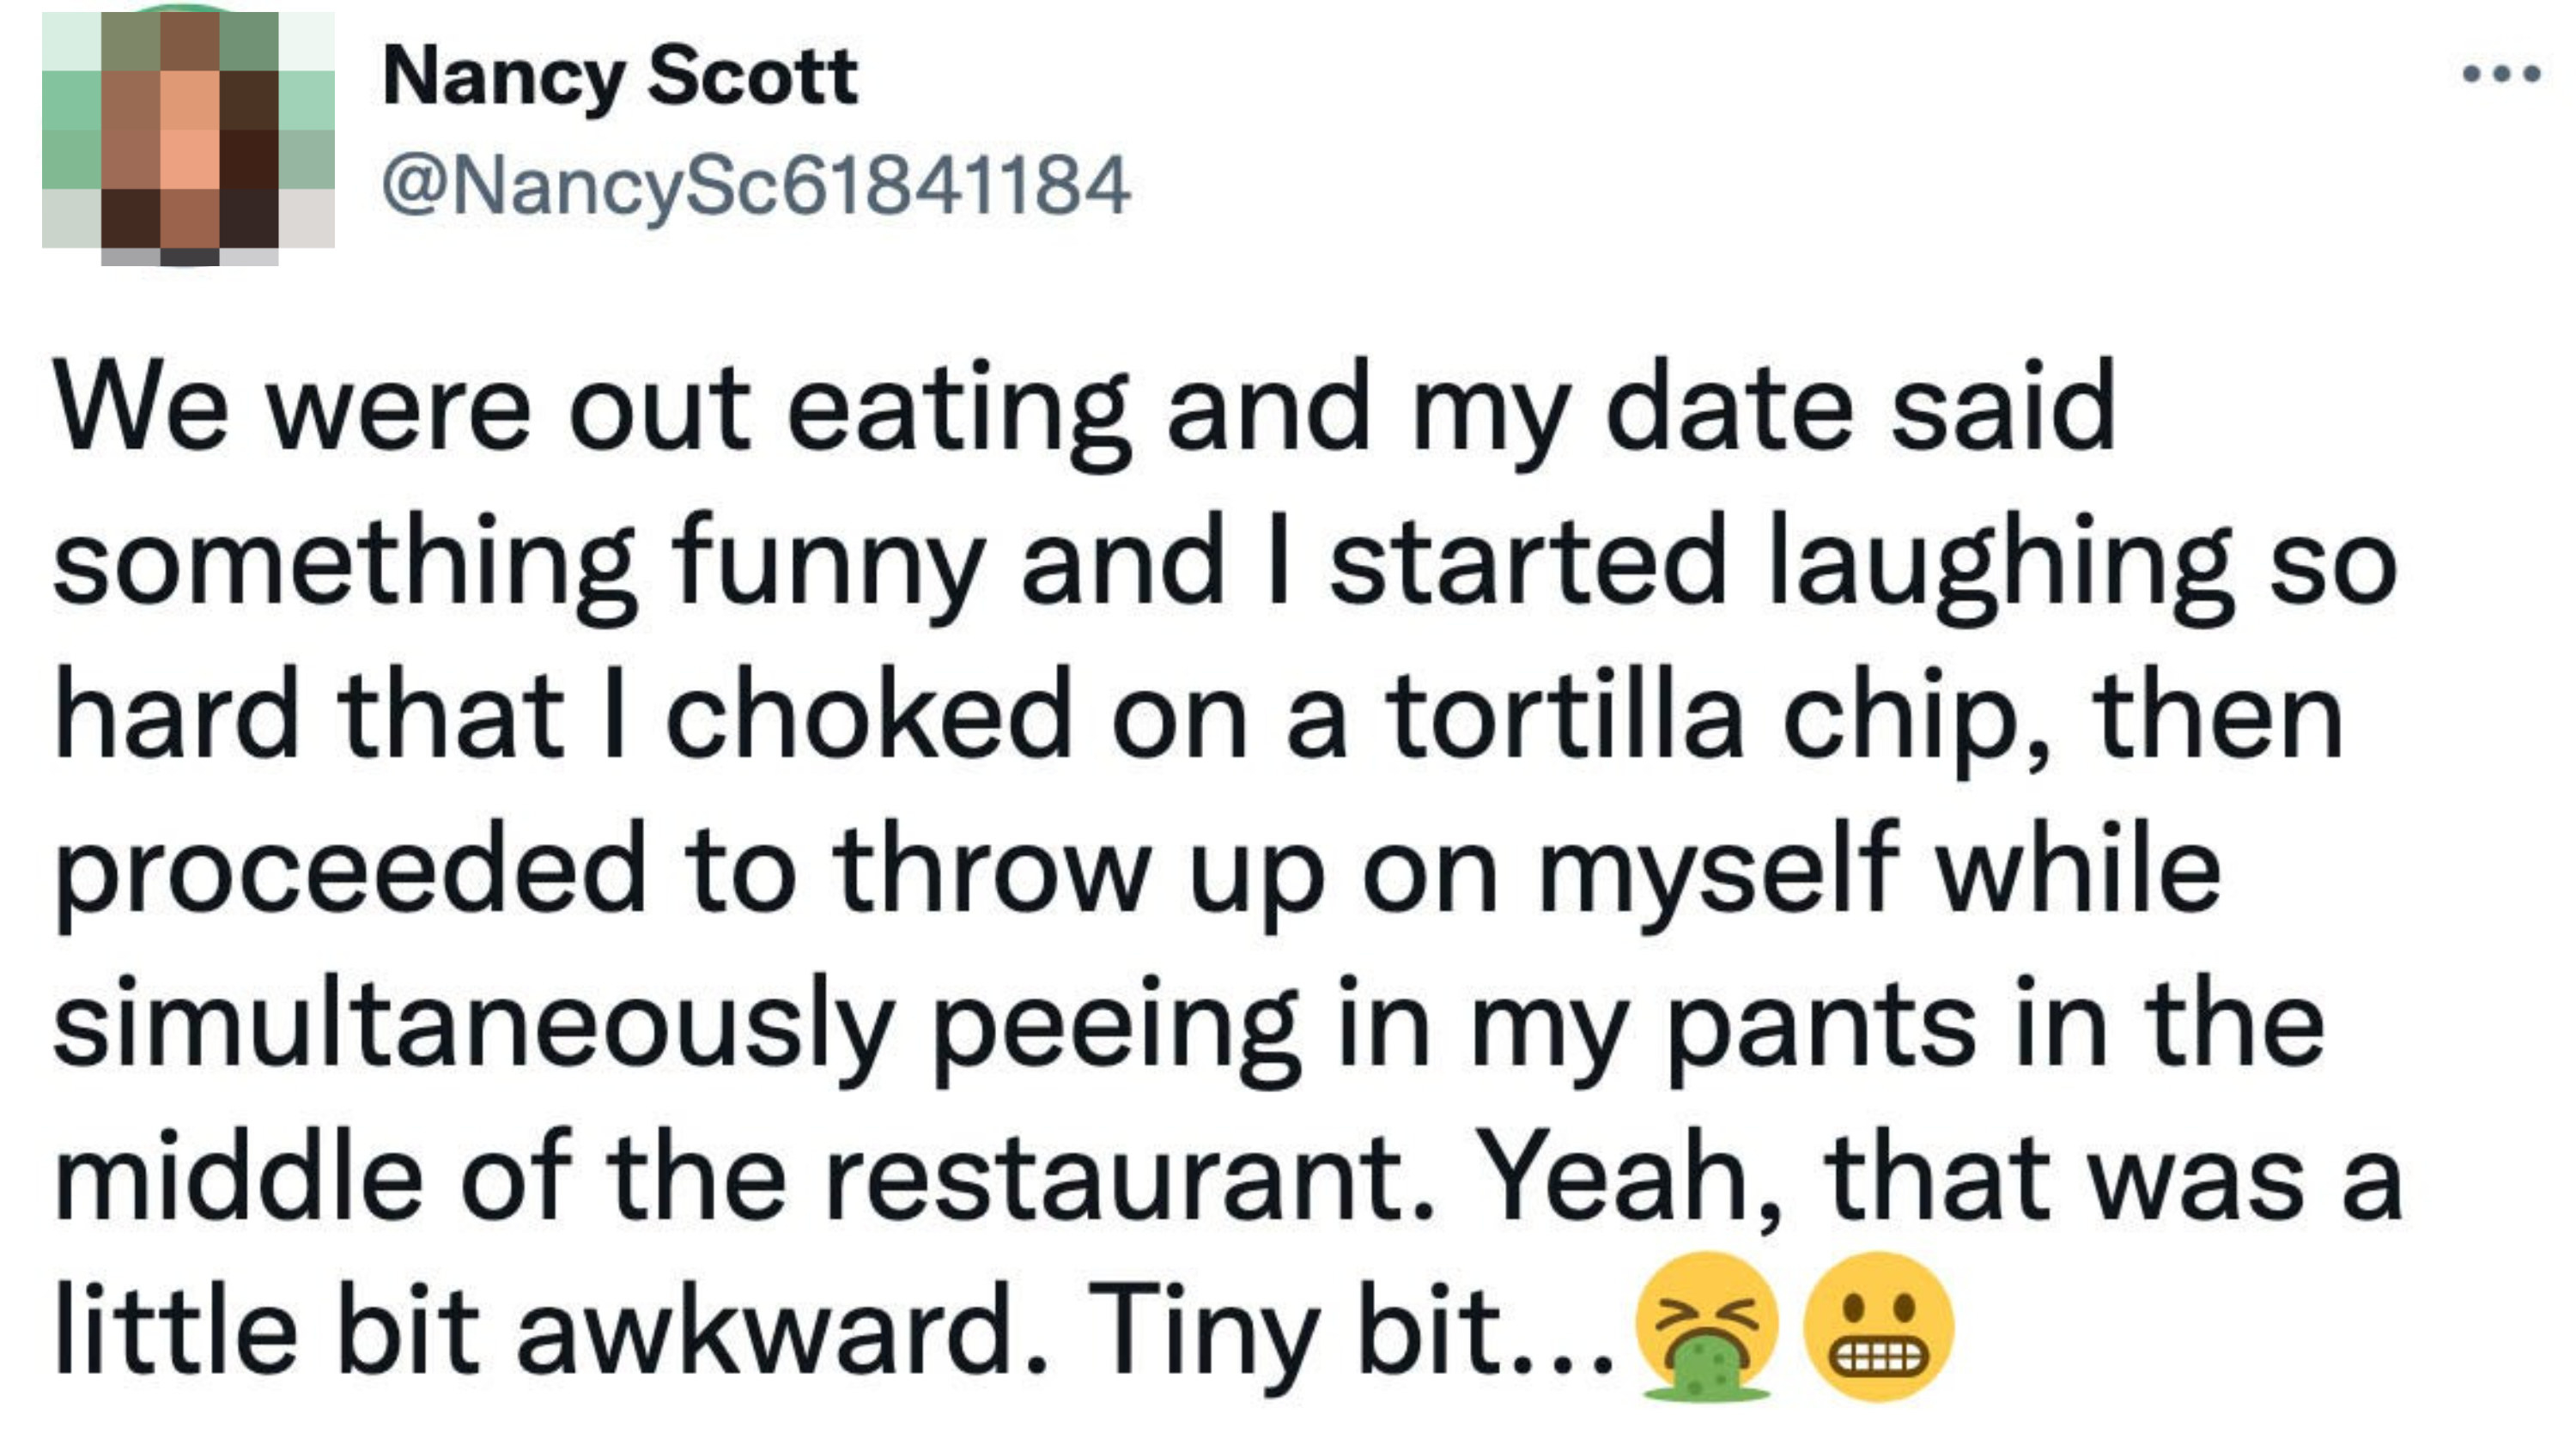 Date where a woman starts laughing and ends up choking on a tortilla chip, throwing up on herself, and peeing in her pants in the restaurant